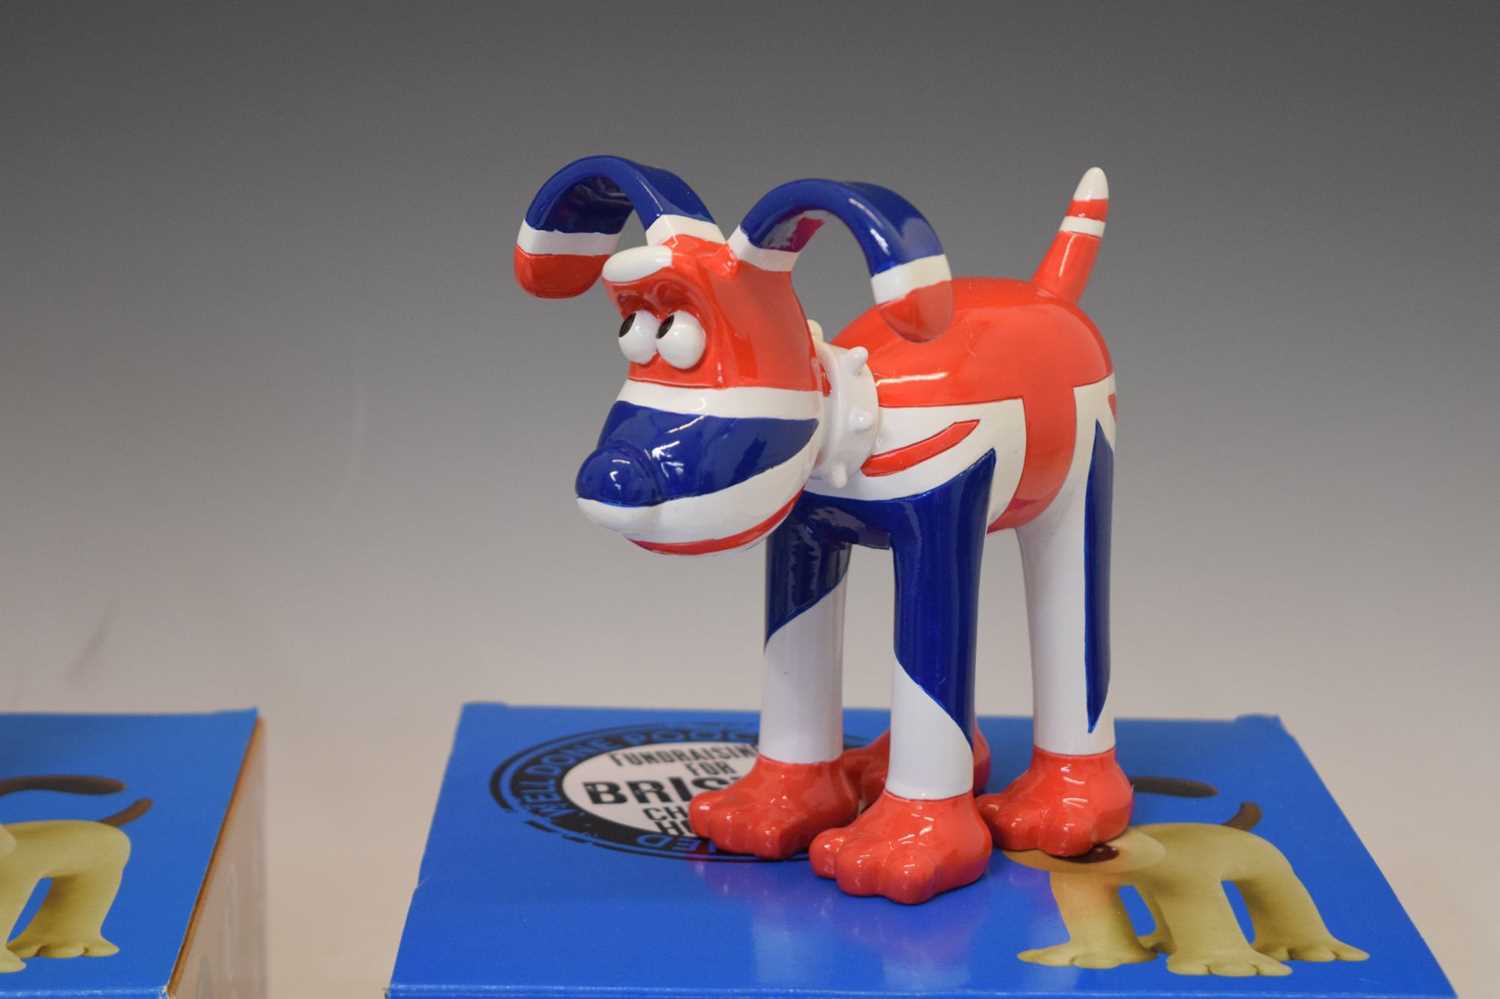 Aardman/Wallace and Gromit - 'Gromit Unleashed' figures - Image 5 of 8